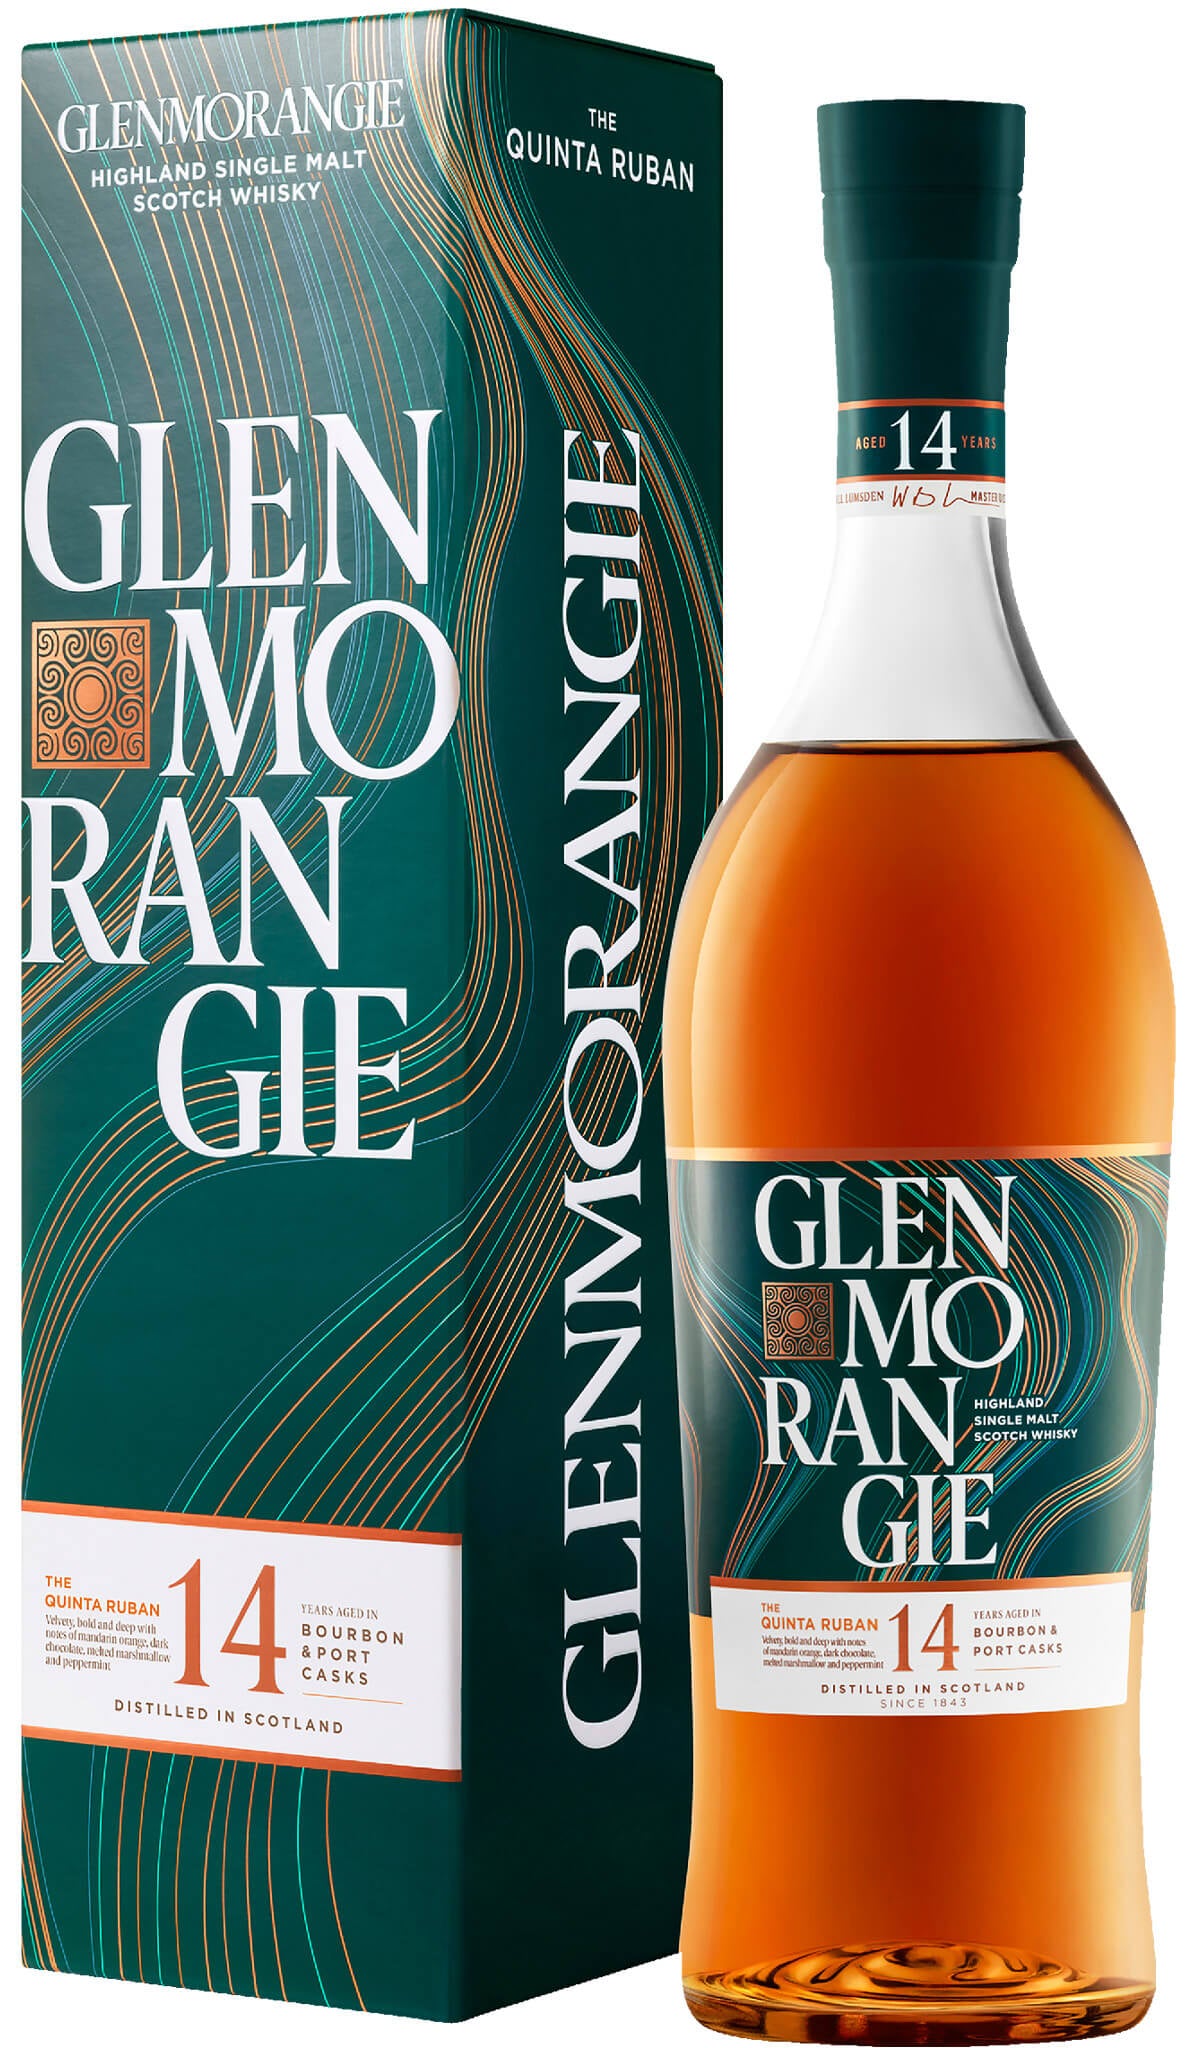 Find out more or buy Glenmorangie The Quinta Rubin 14 YO Scotch Whisky online at Wine Sellers Direct - Australia’s independent liquor specialists.